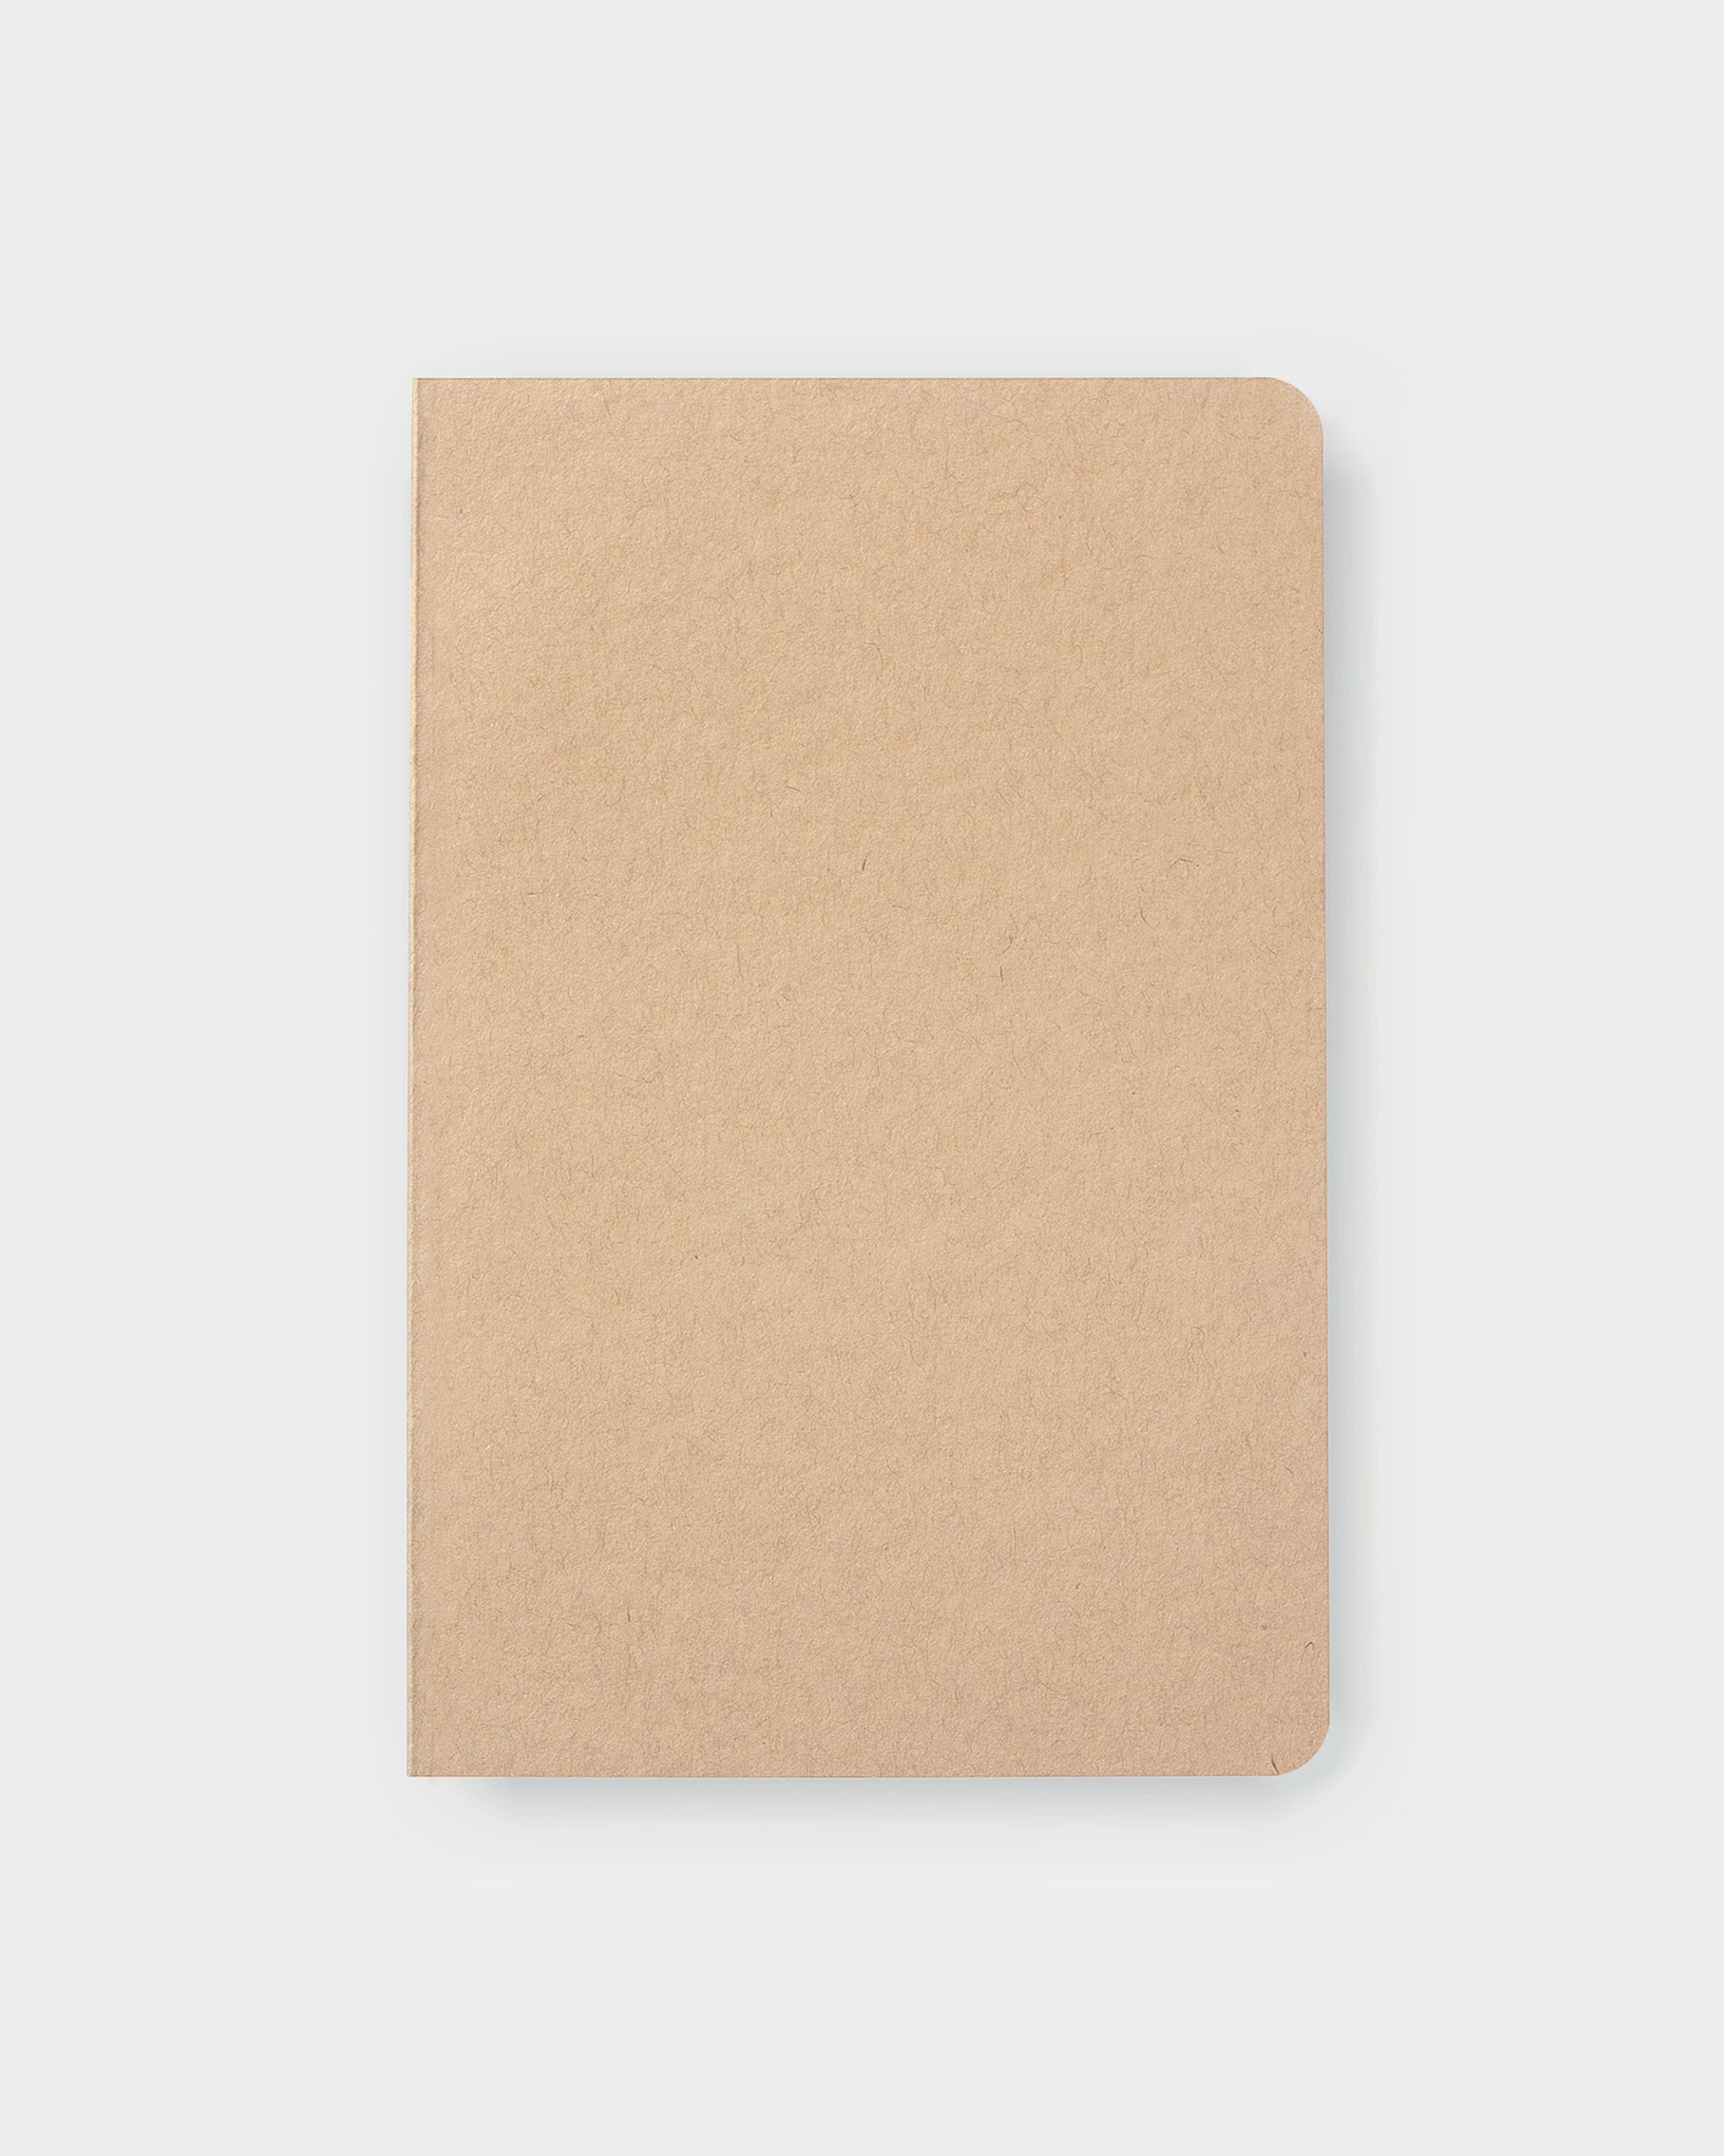 4.25 x 6.5" standard notebook, made with eco-friendly papers. Graph pages, kraft color way.